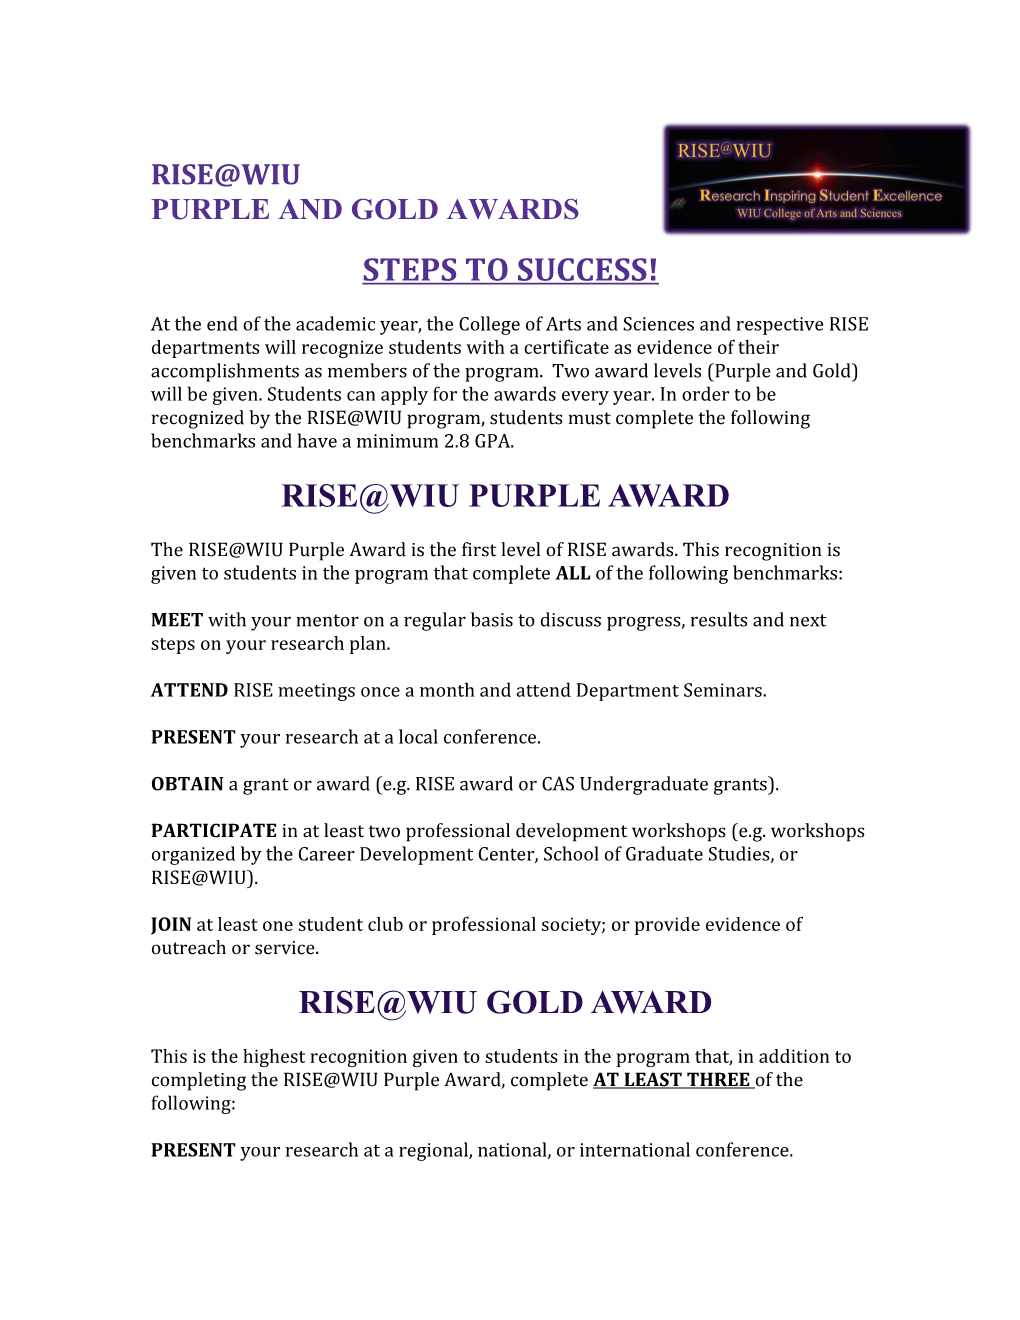 Purple and Gold Awards